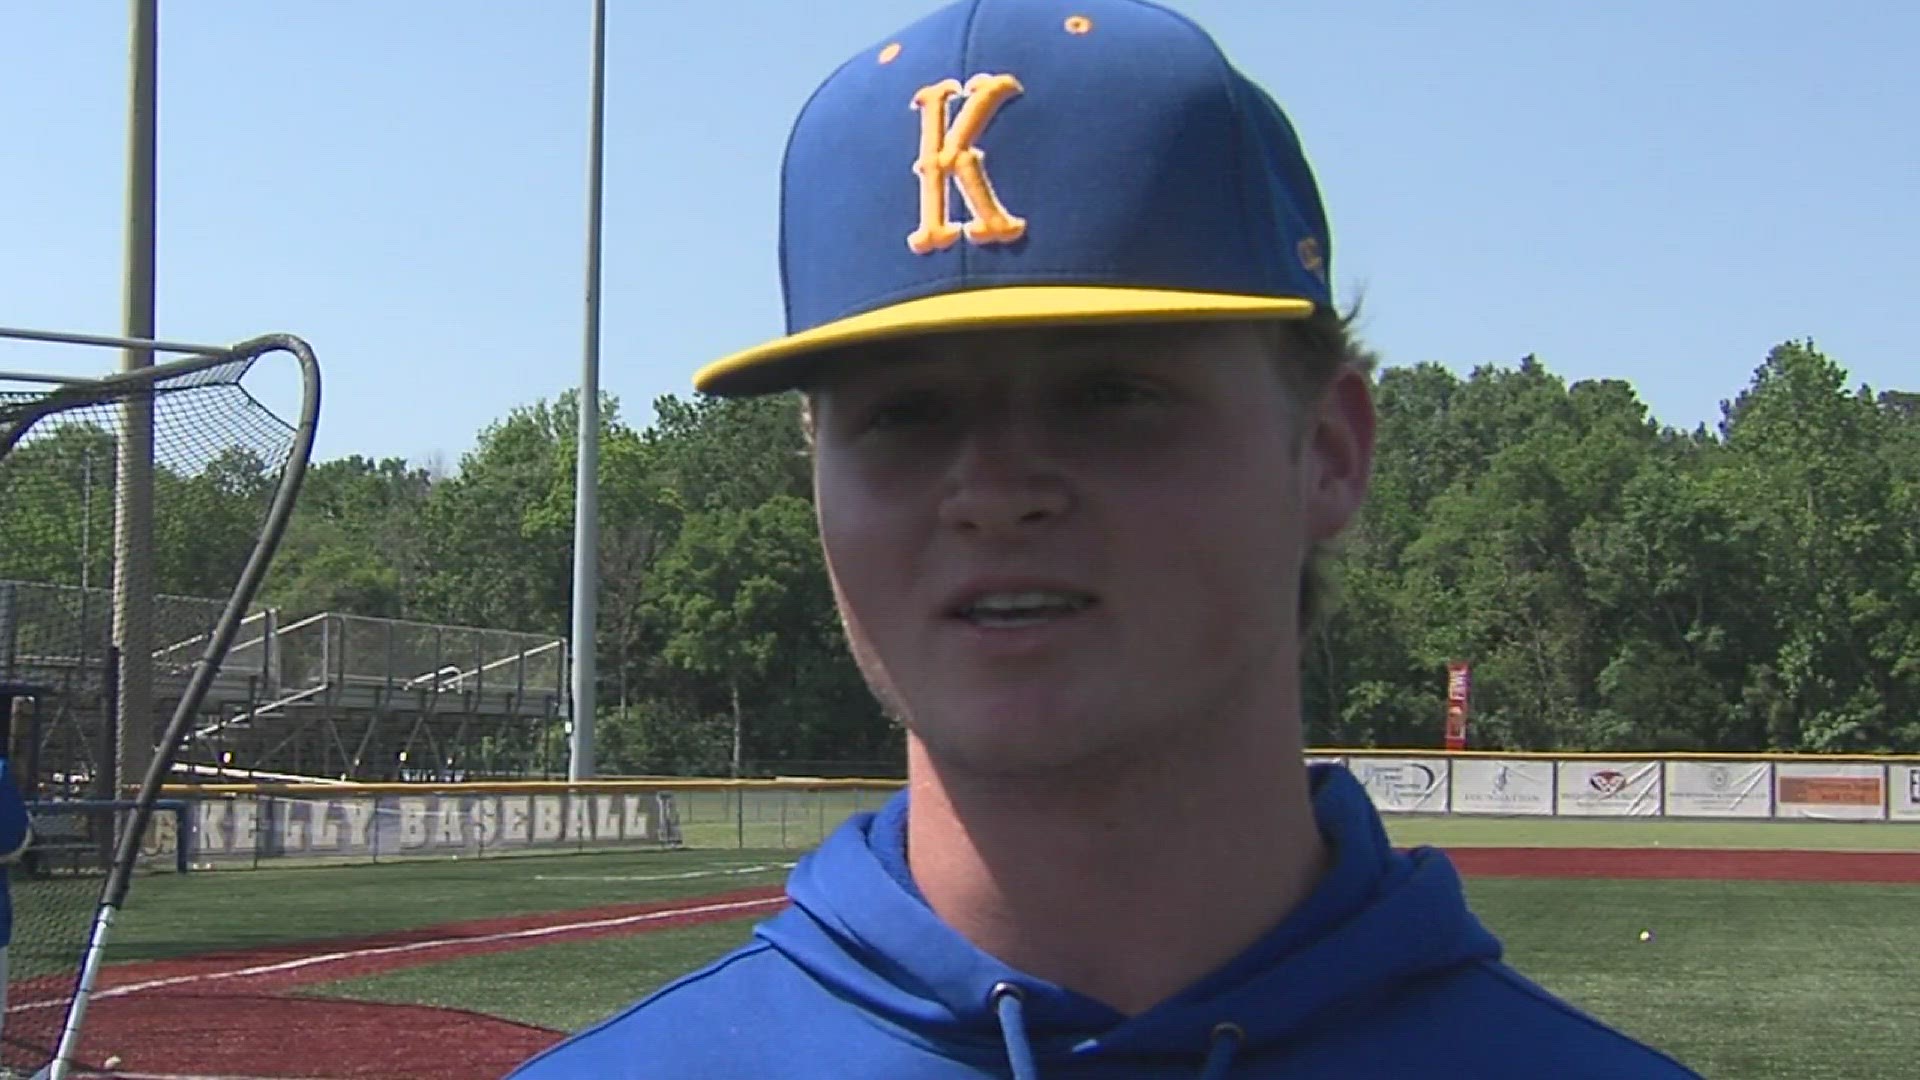 Rhett Knox remains undefeated on the mound as Kelly prepares for Regionals